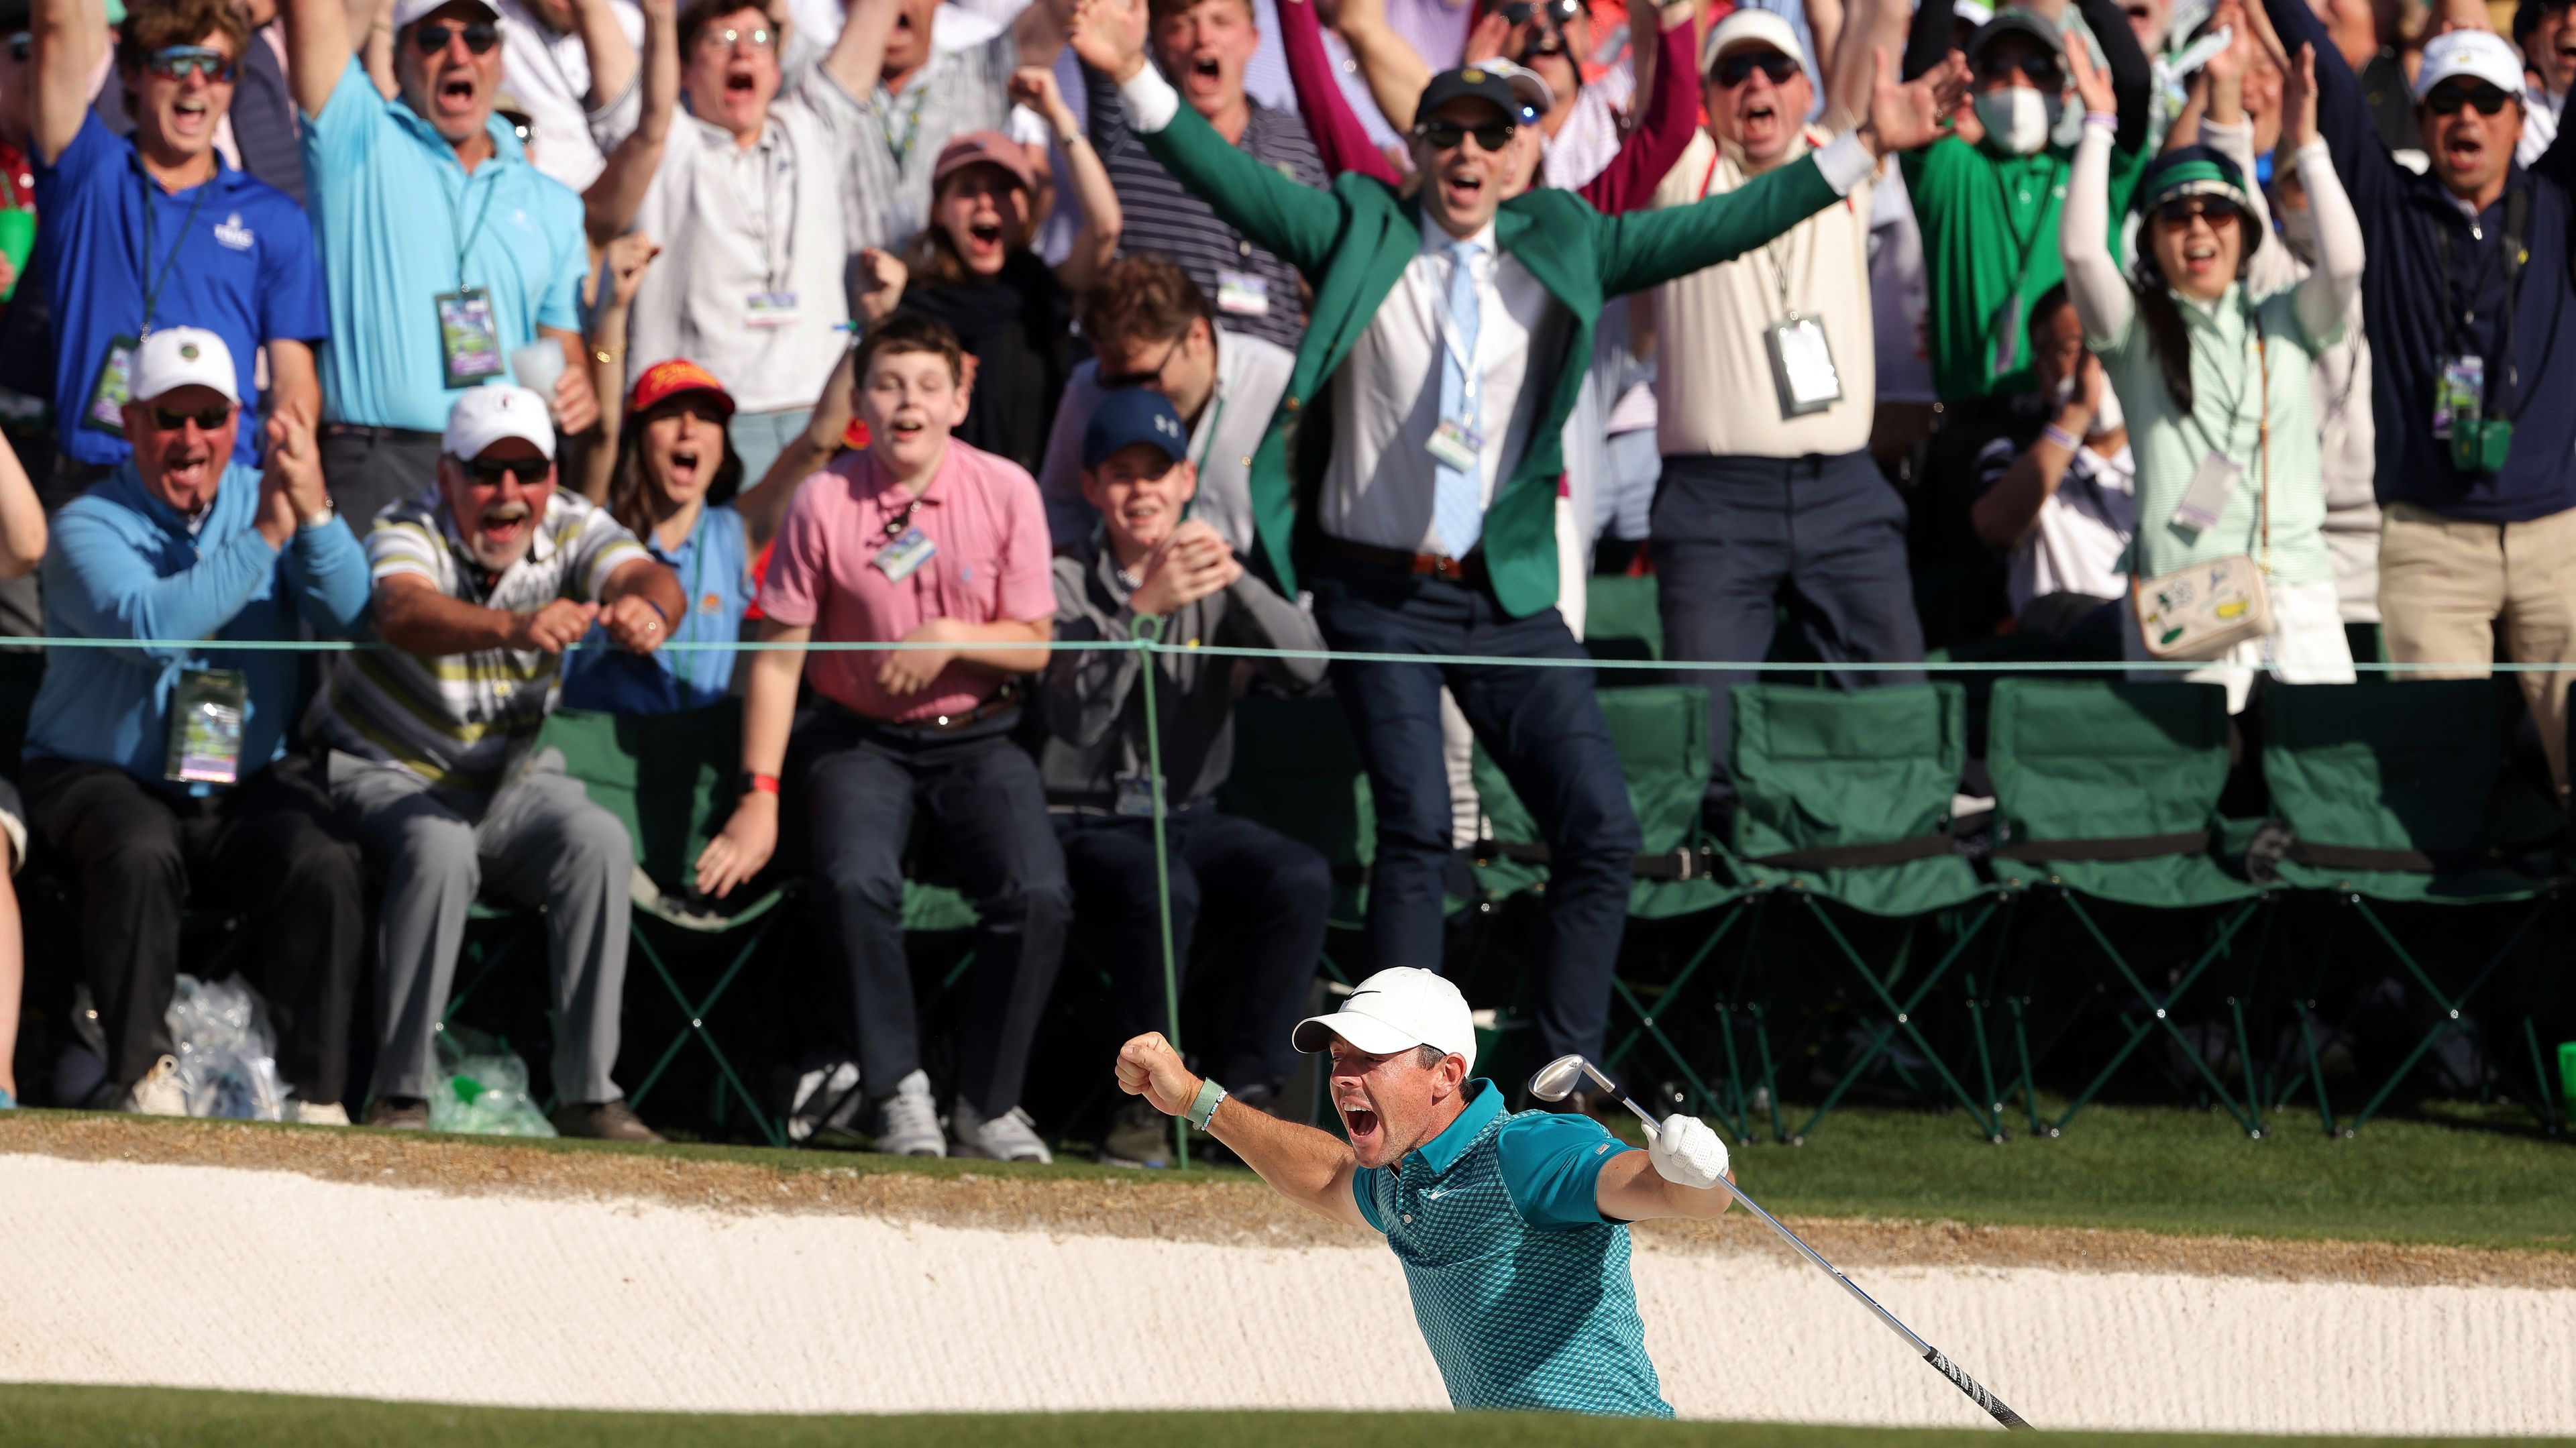 Rory McIlroy reacts after chipping in for birdie from the bunker on the 18th green during the final round of the Masters at Augusta.